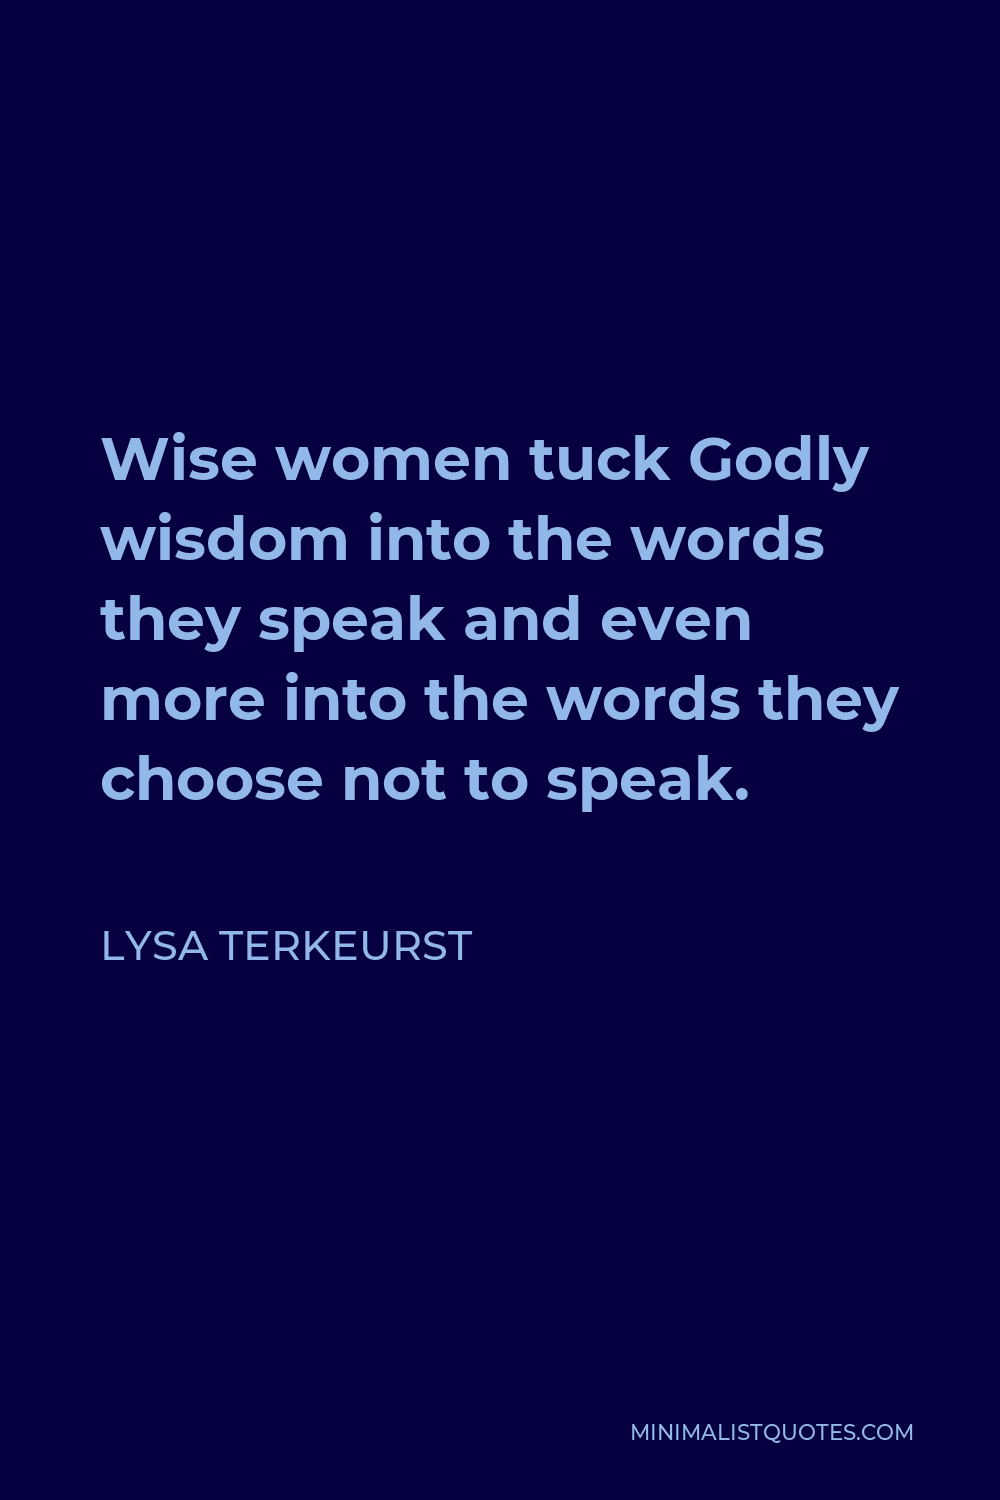 Lysa TerKeurst Quote - Wise women tuck Godly wisdom into the words they speak and even more into the words they choose not to speak.